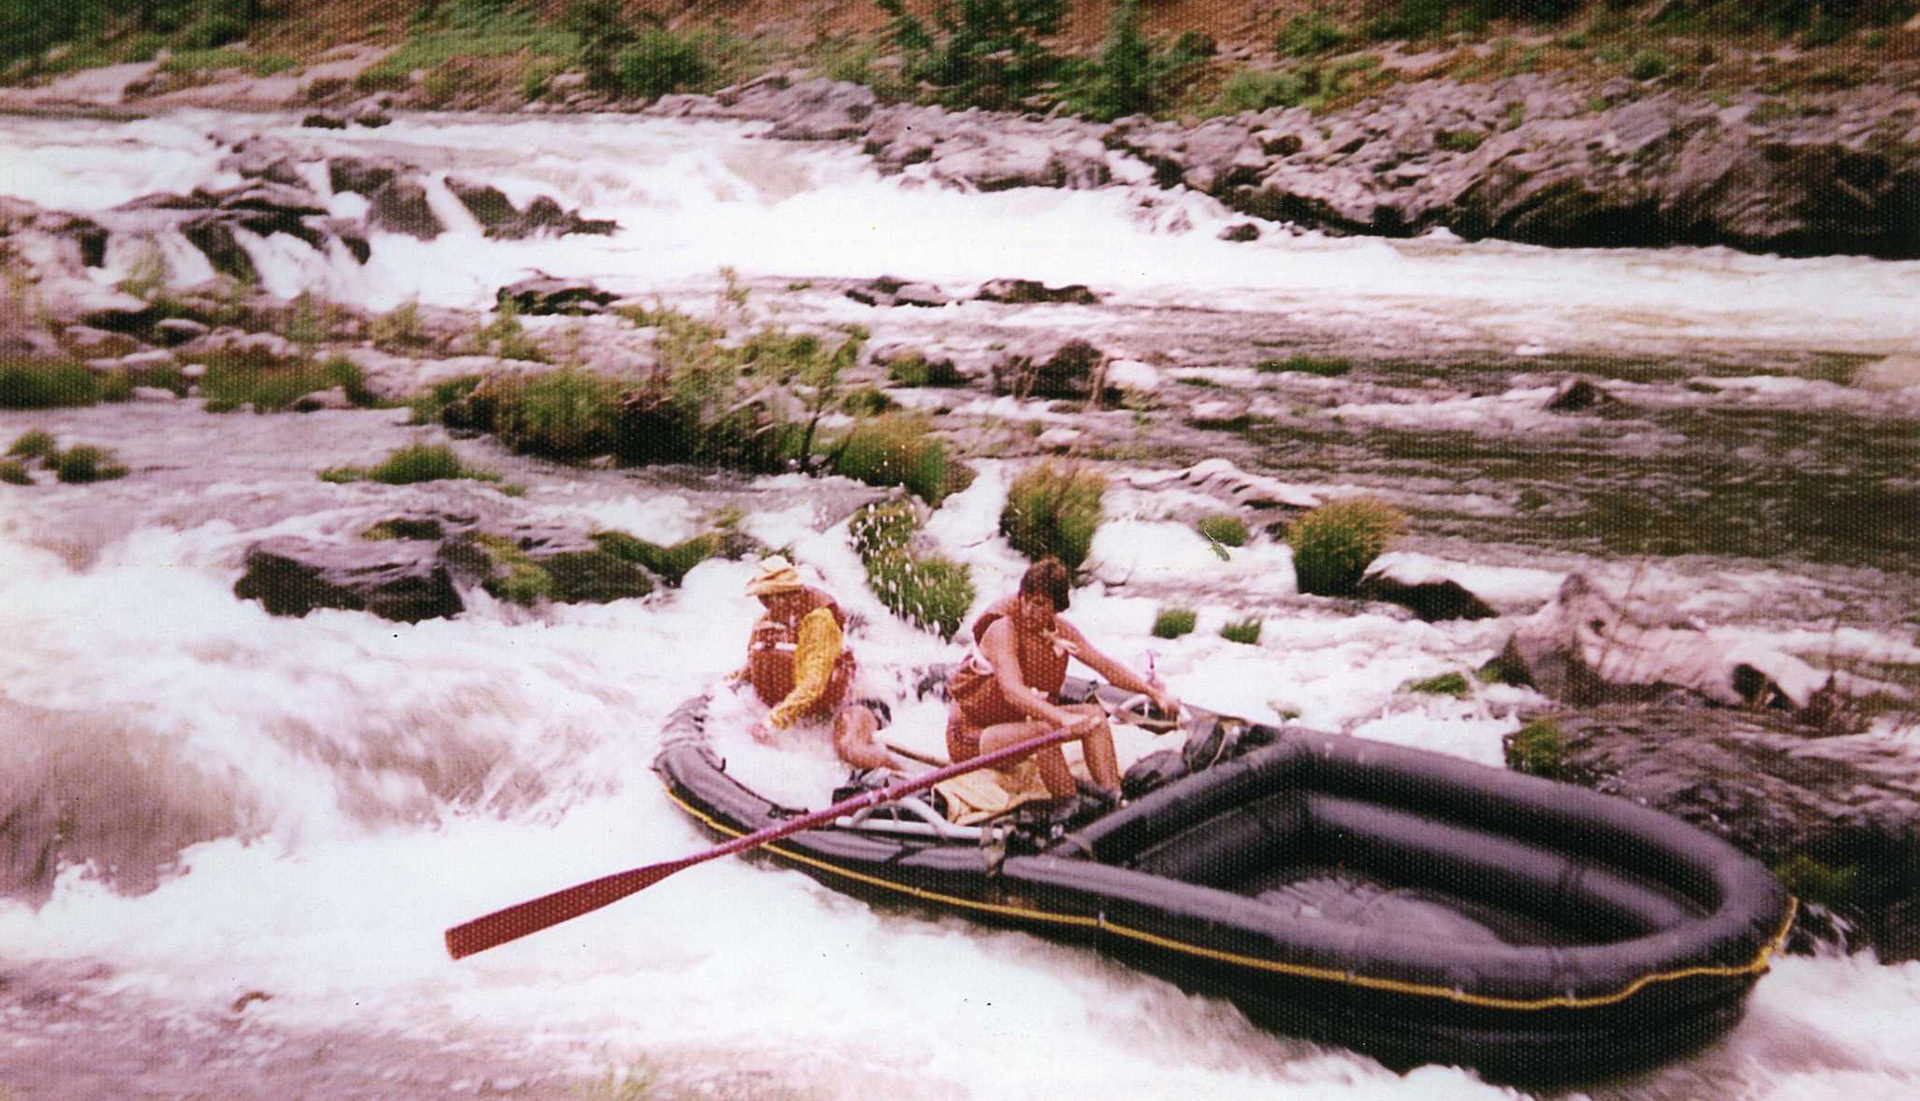 Randy and George on the Rogue River in the 70s